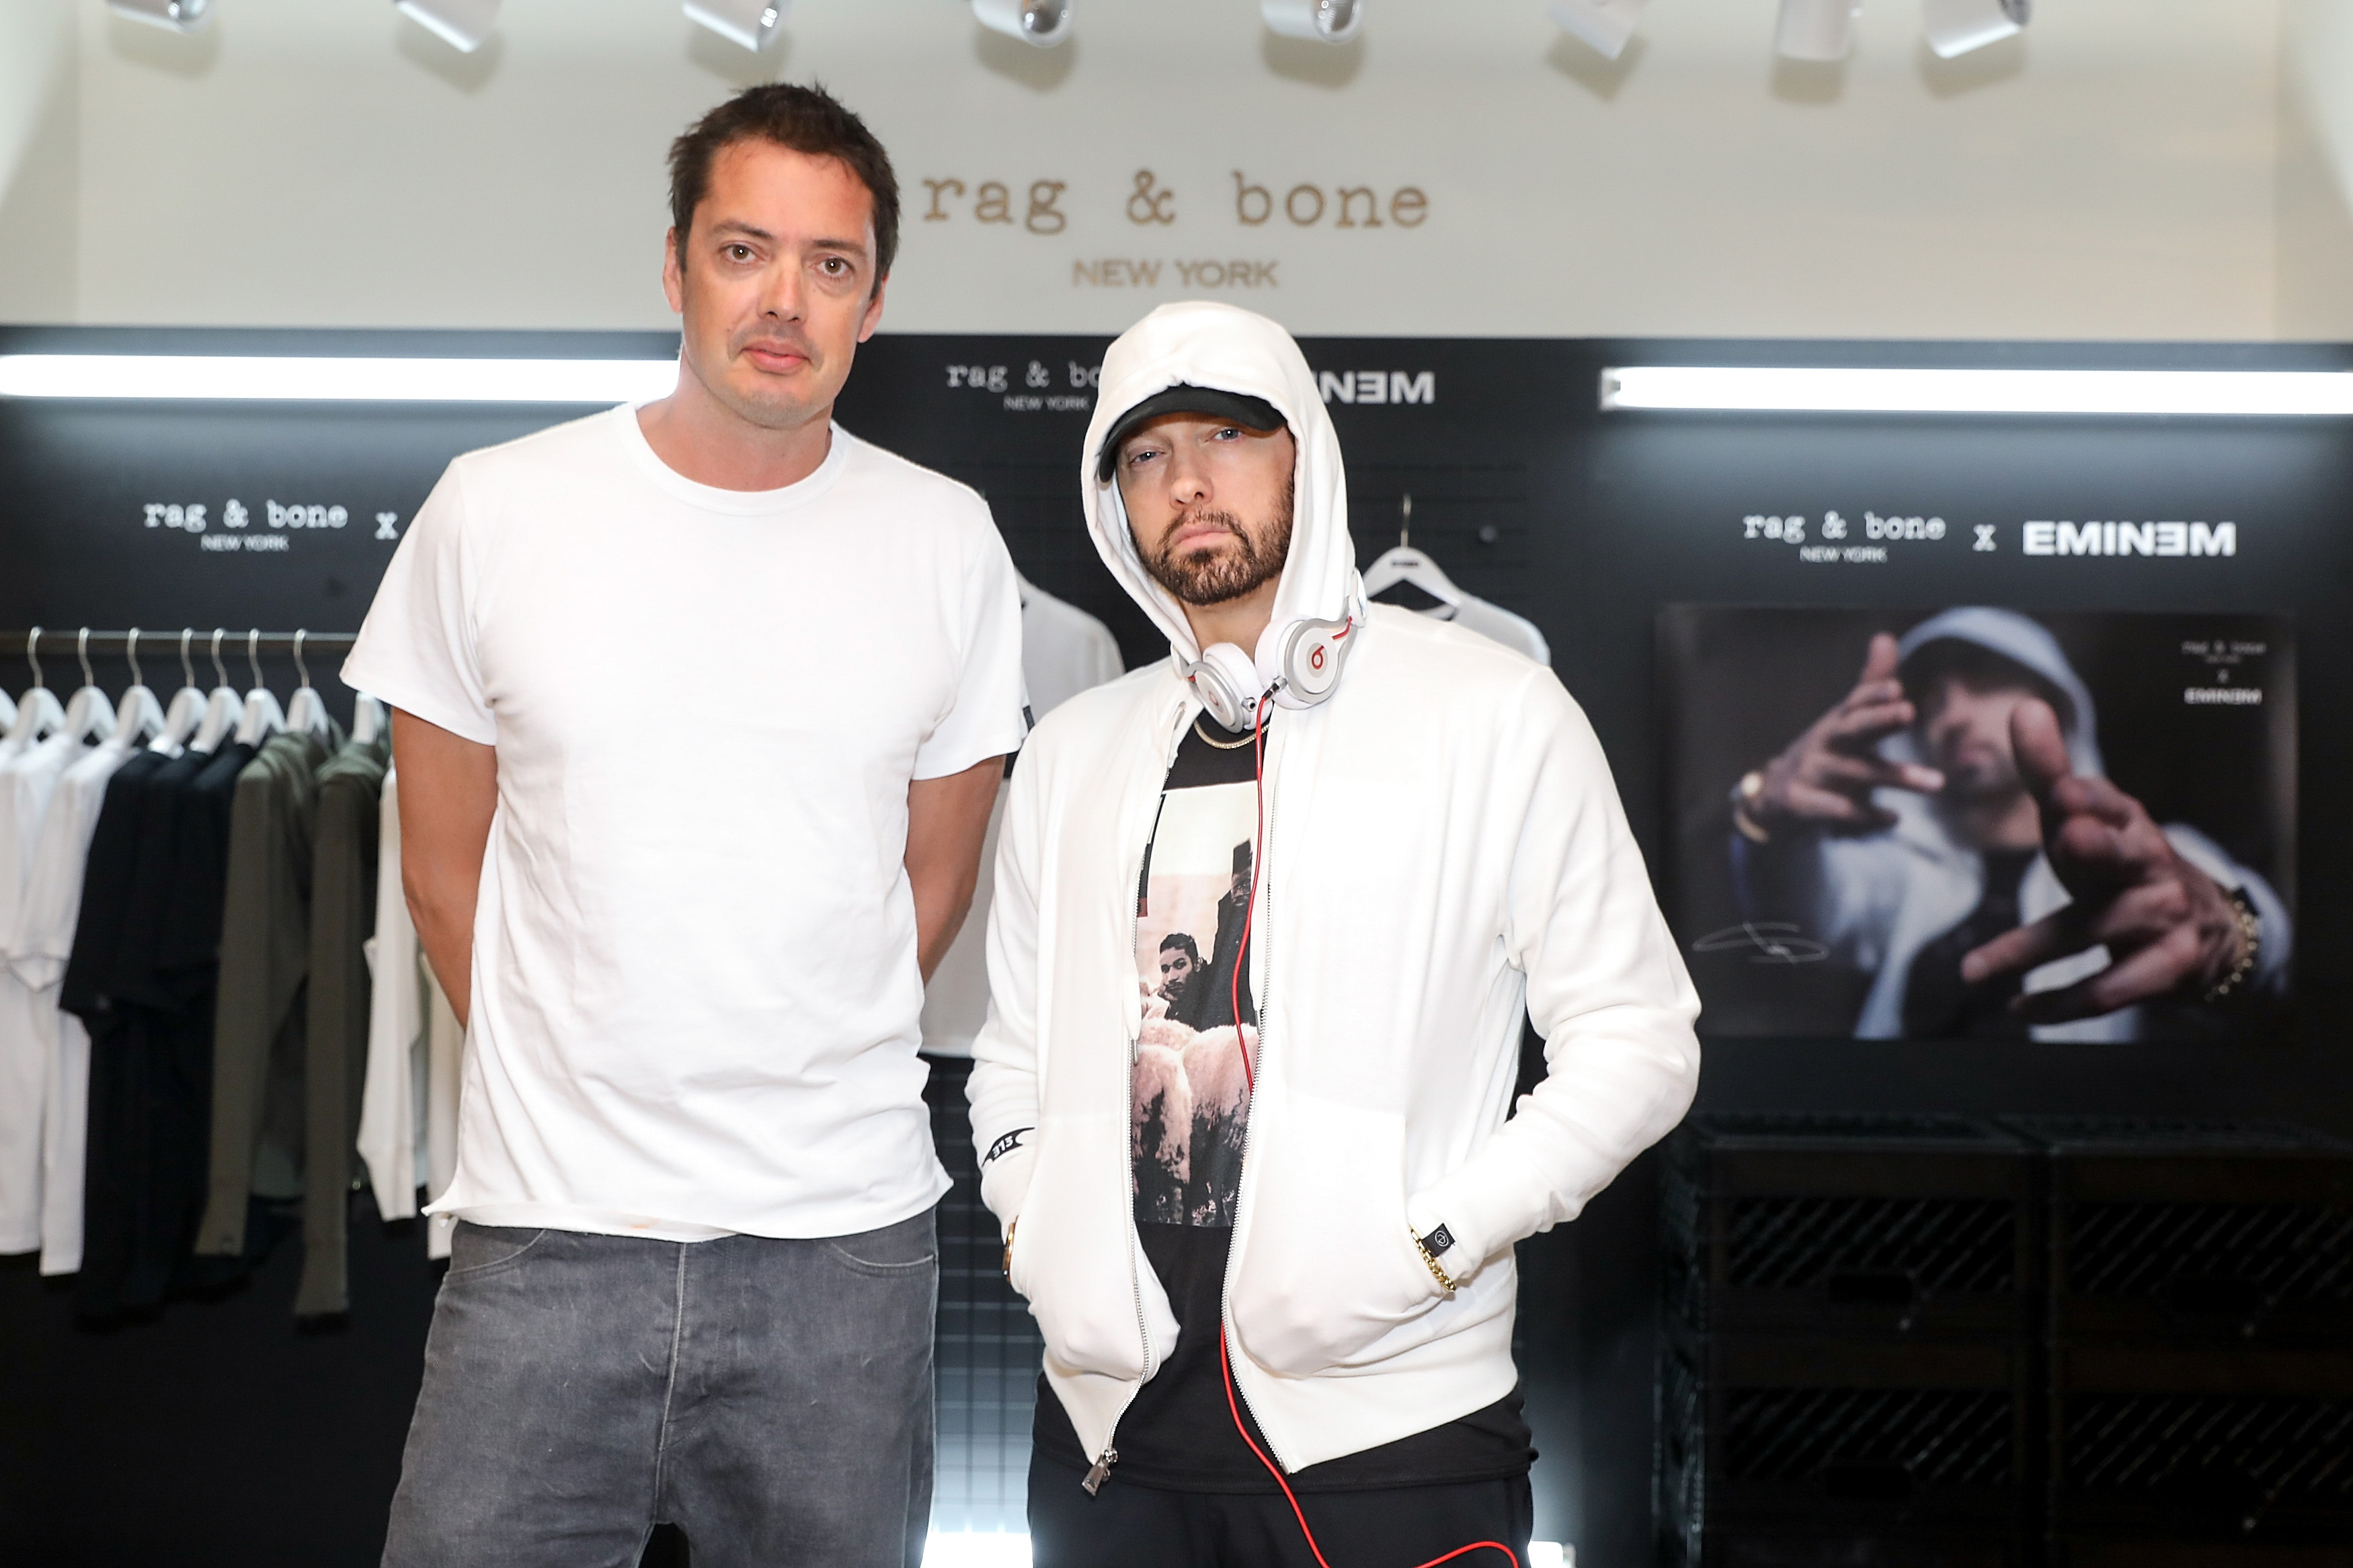 Eminem Teams With Rag Bone For Clothing Collaboration And London